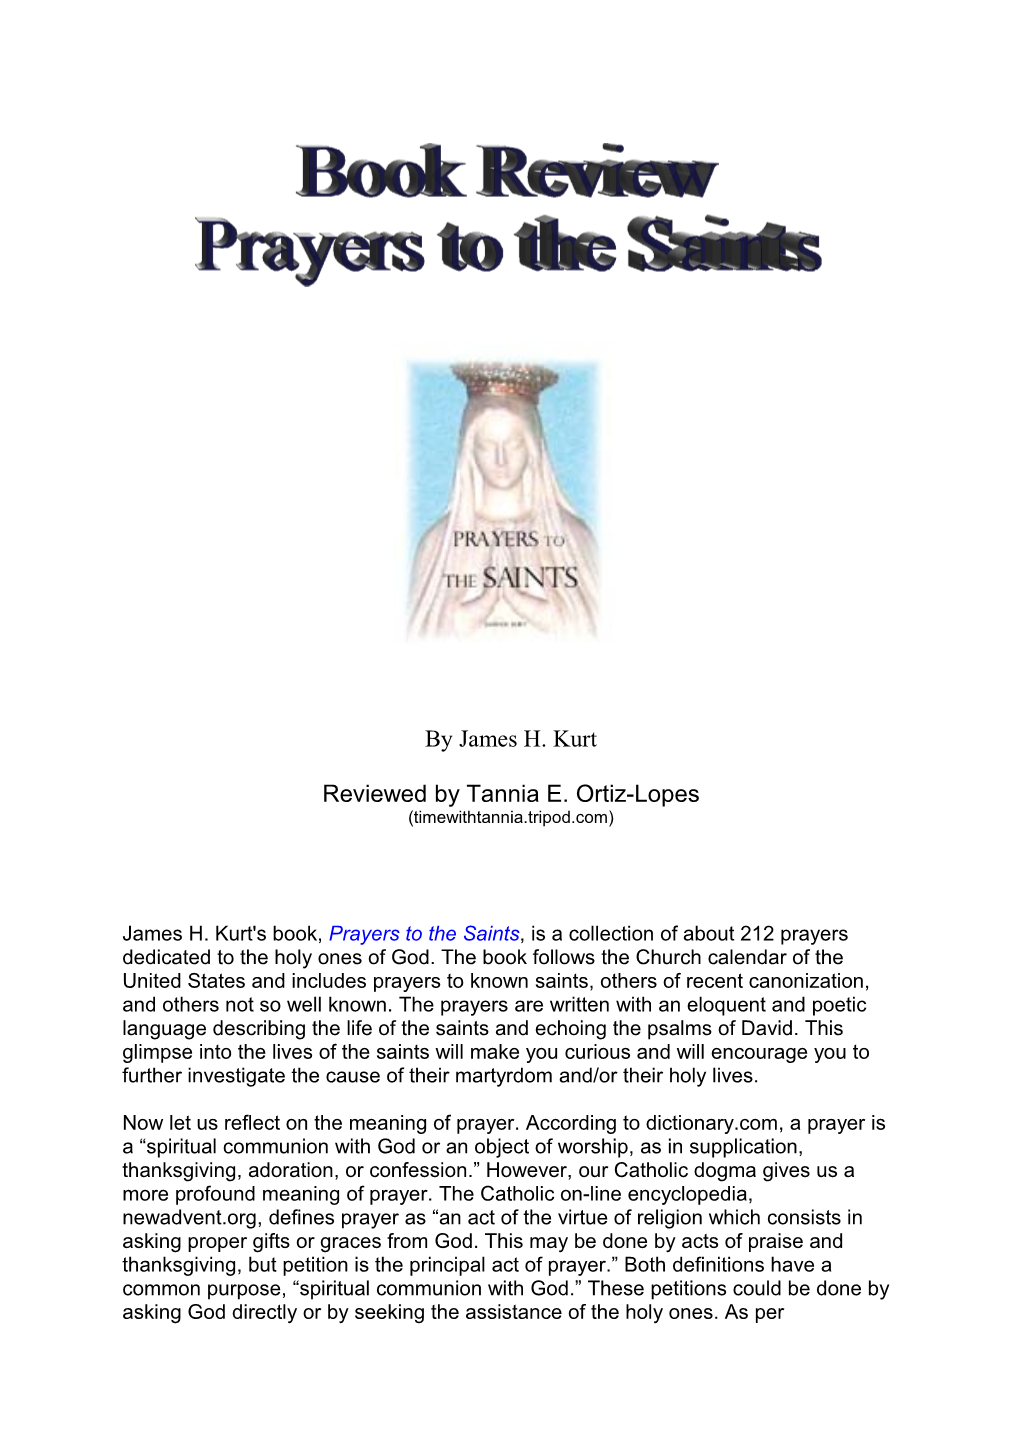 Prayers to the Saints, Is a Collection of About 212 Prayers Dedicated to the Holy Ones of God